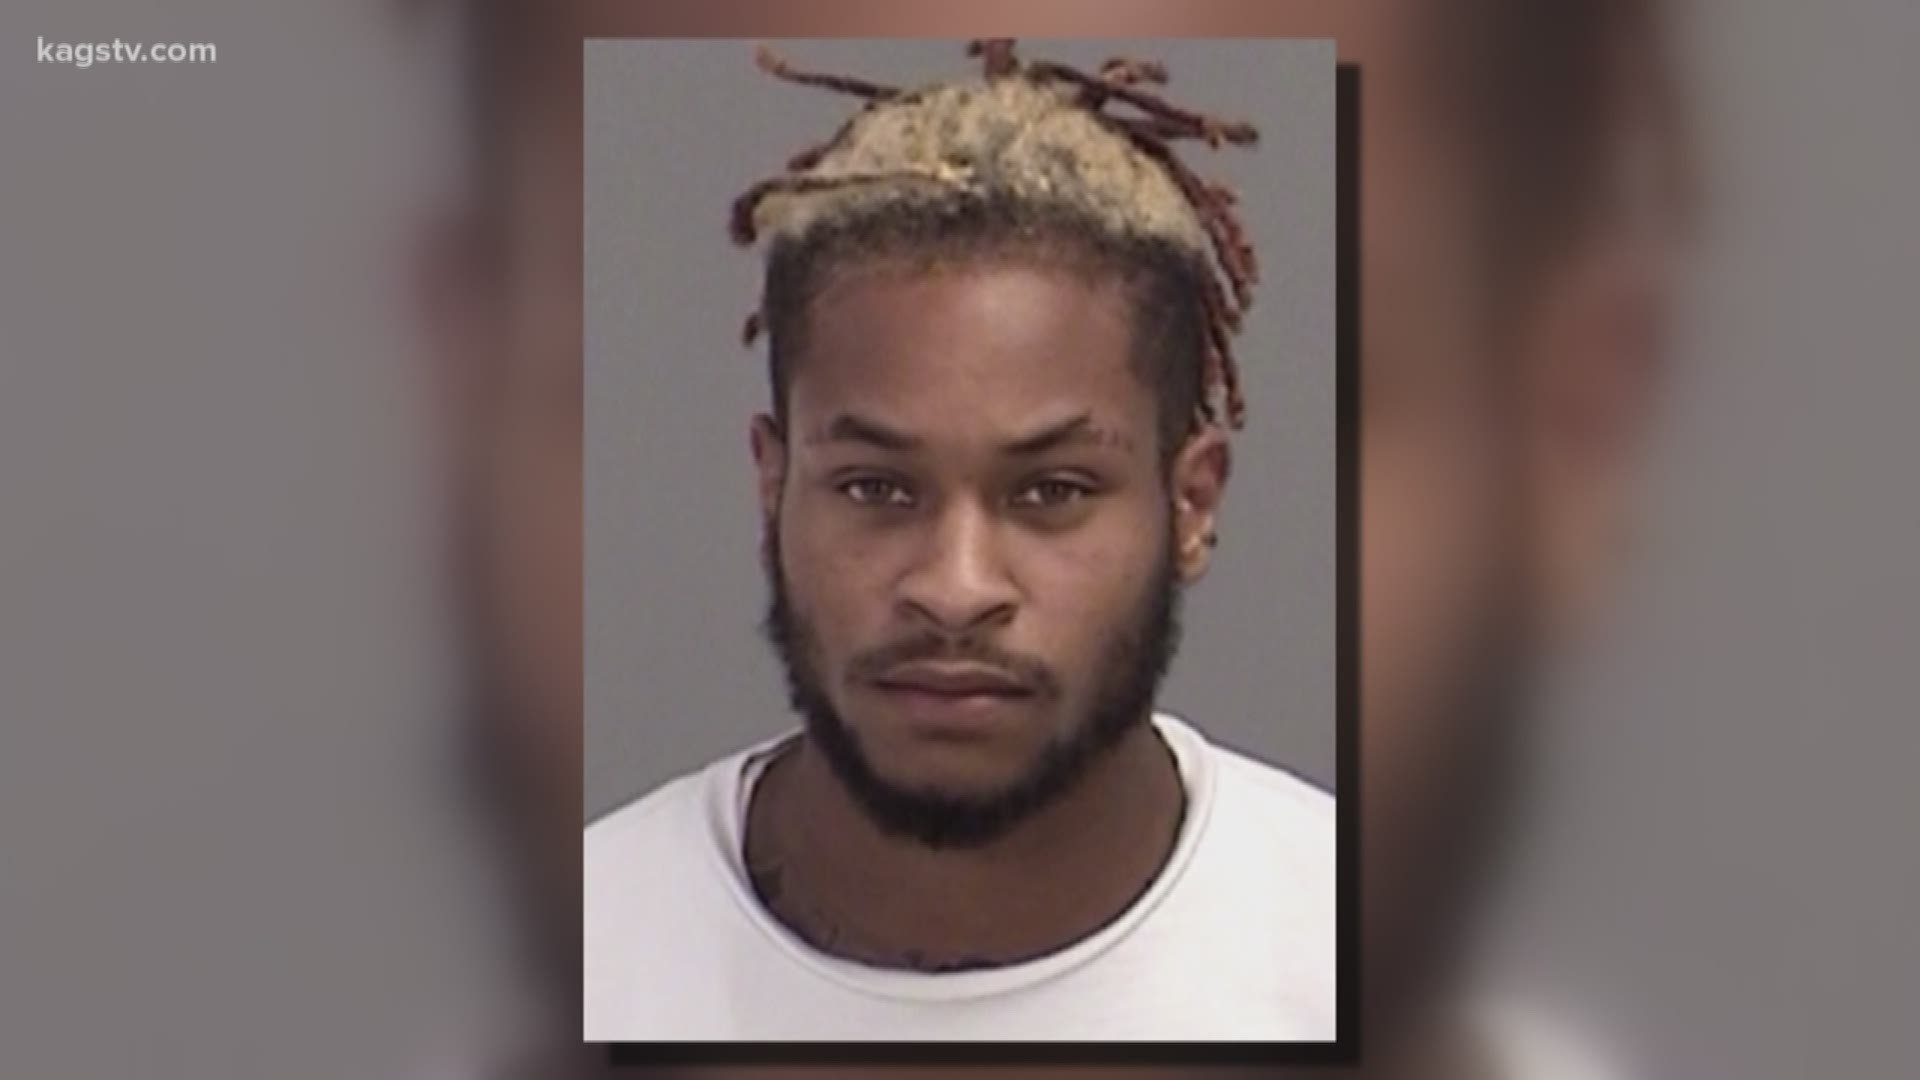 Texas A&M football player facing assault charges